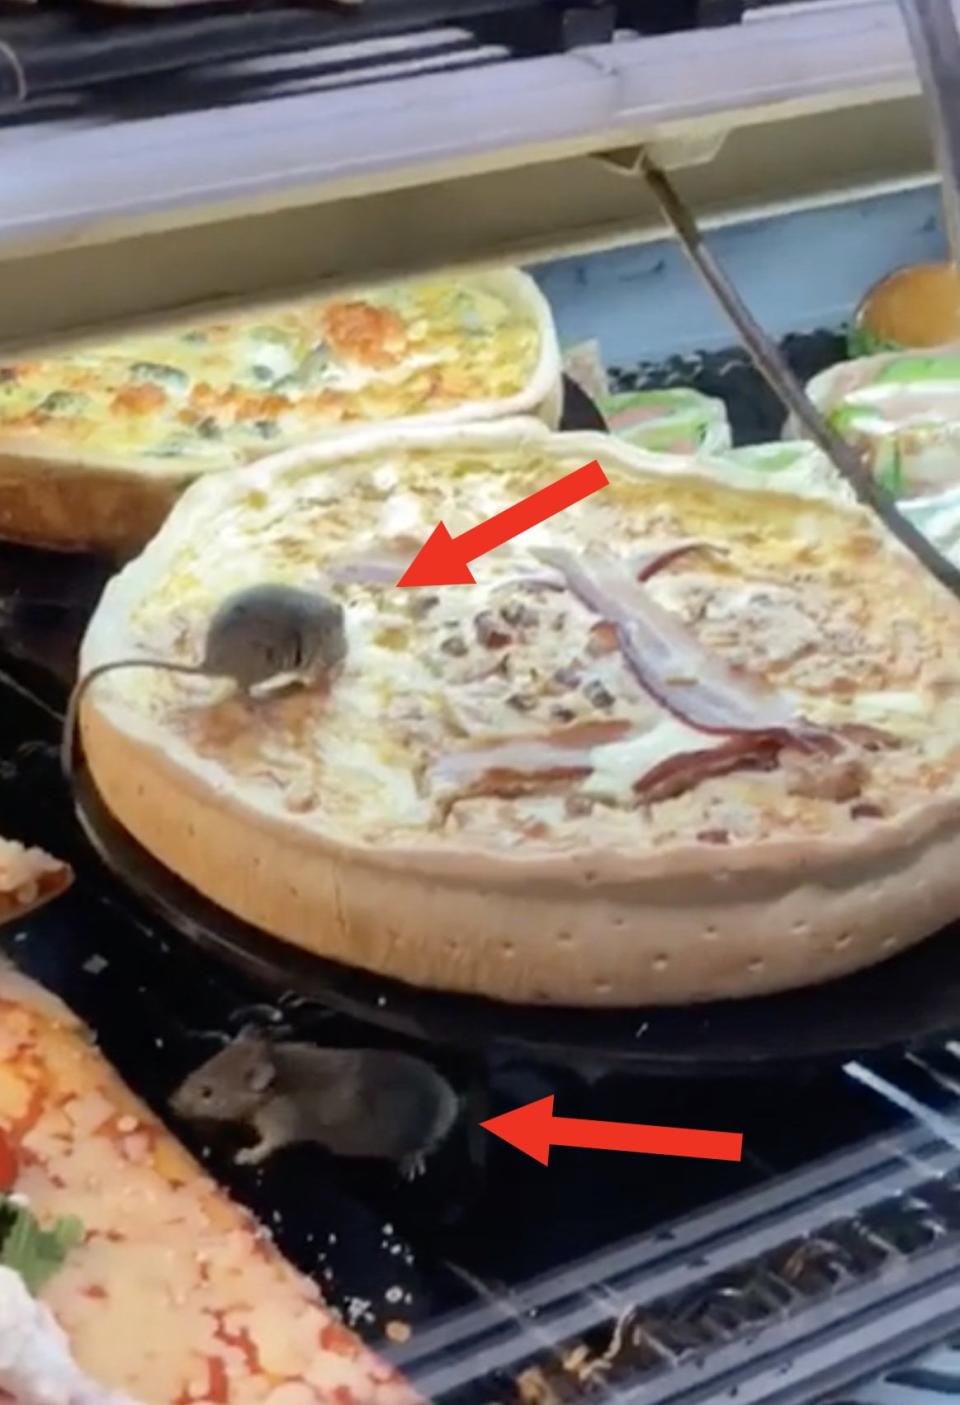 Rats are in a restaurant's display case, sitting on the pizzas